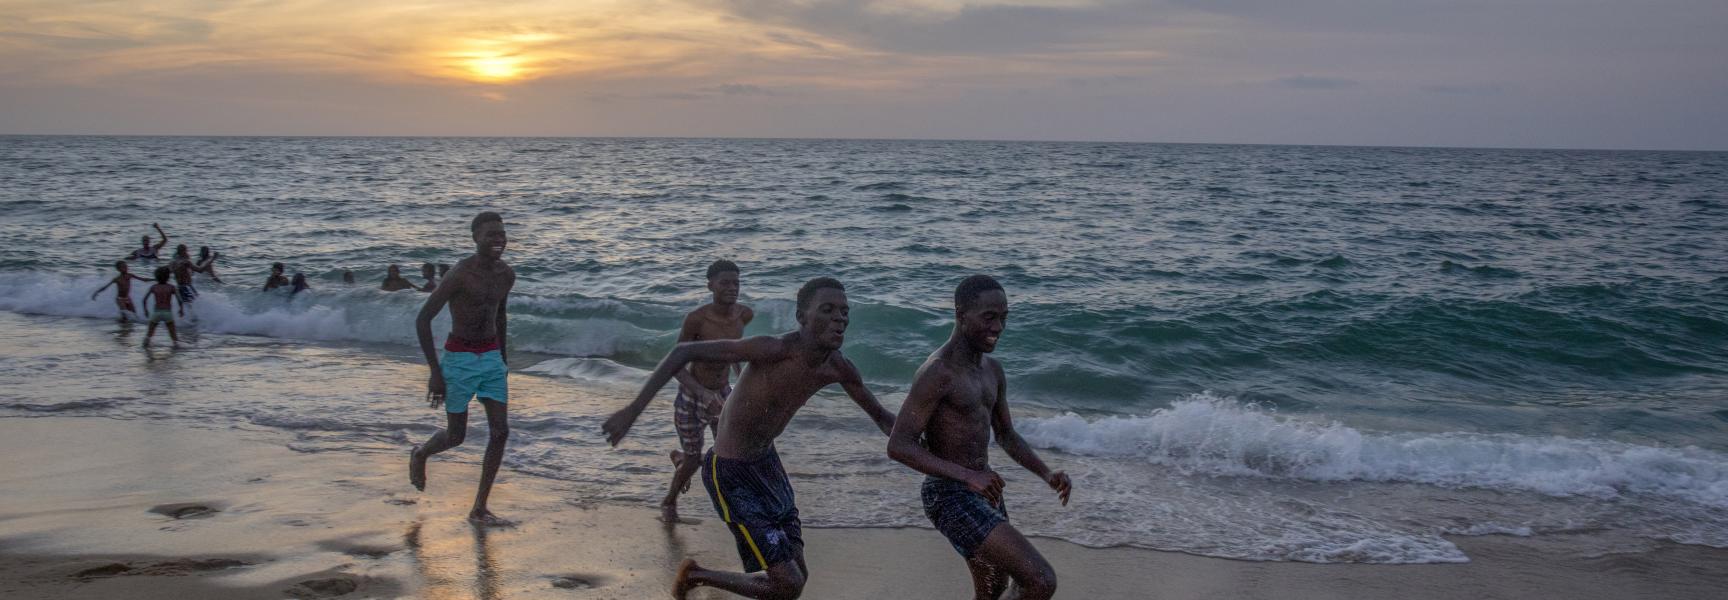 Men playing soccer on the beach in Angola